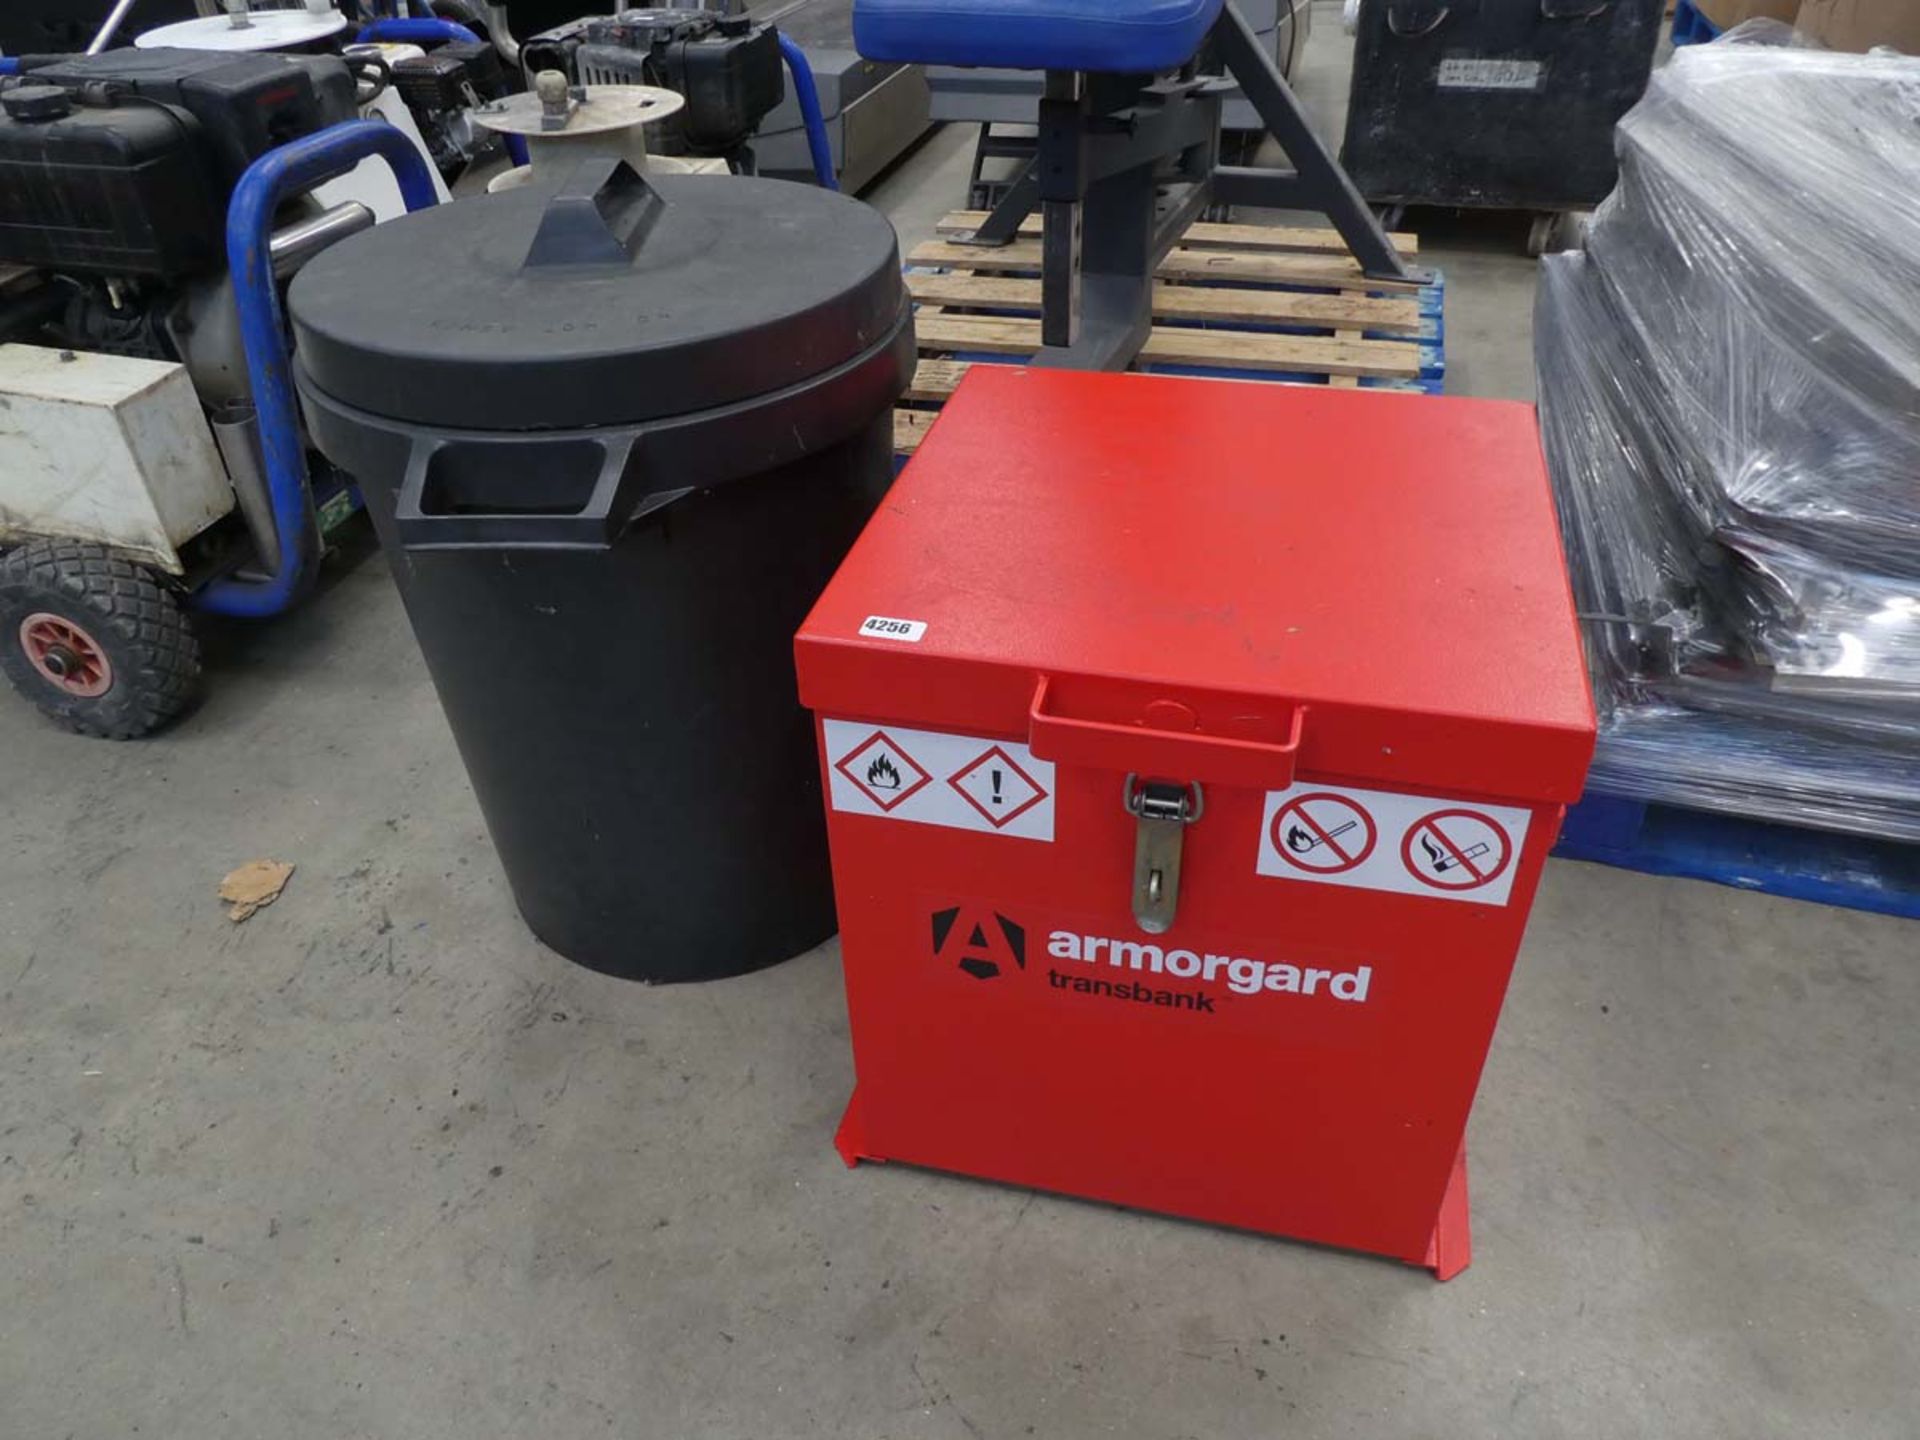 Armorgard red toolbox and bin containing rock salt